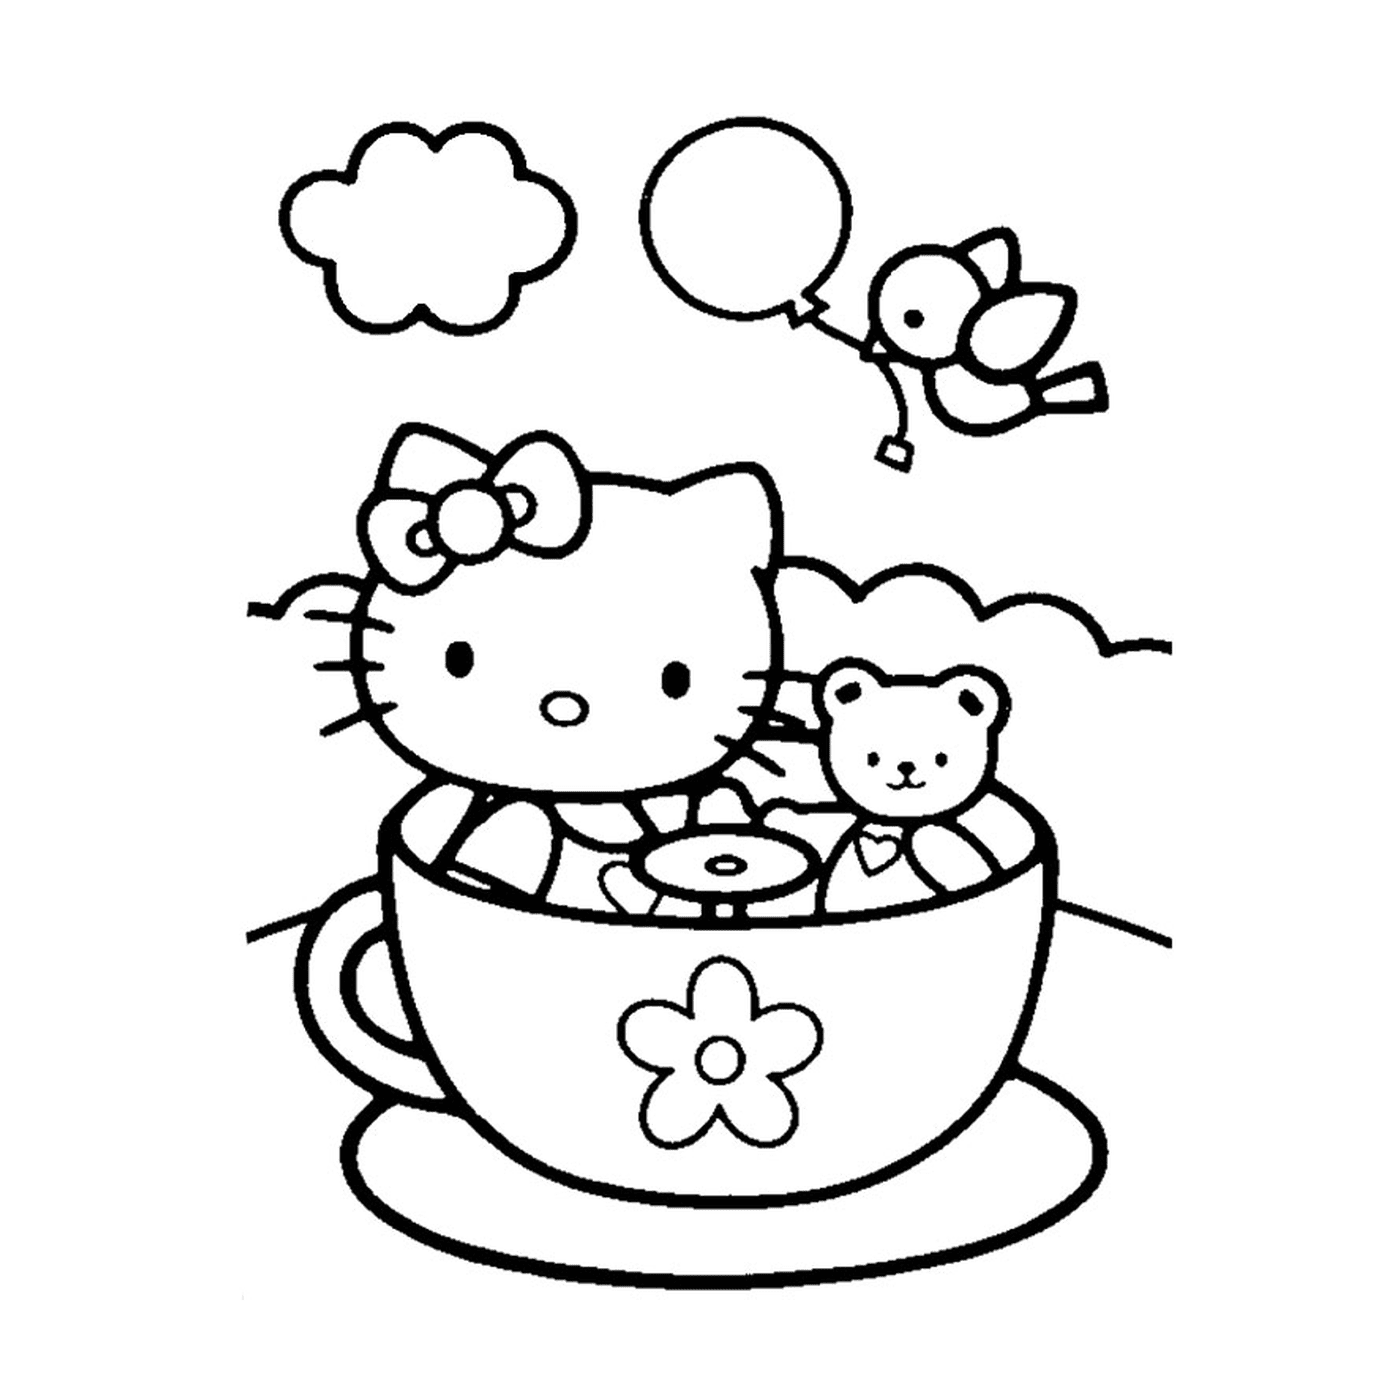  Hello Kitty sitting in a teacup 